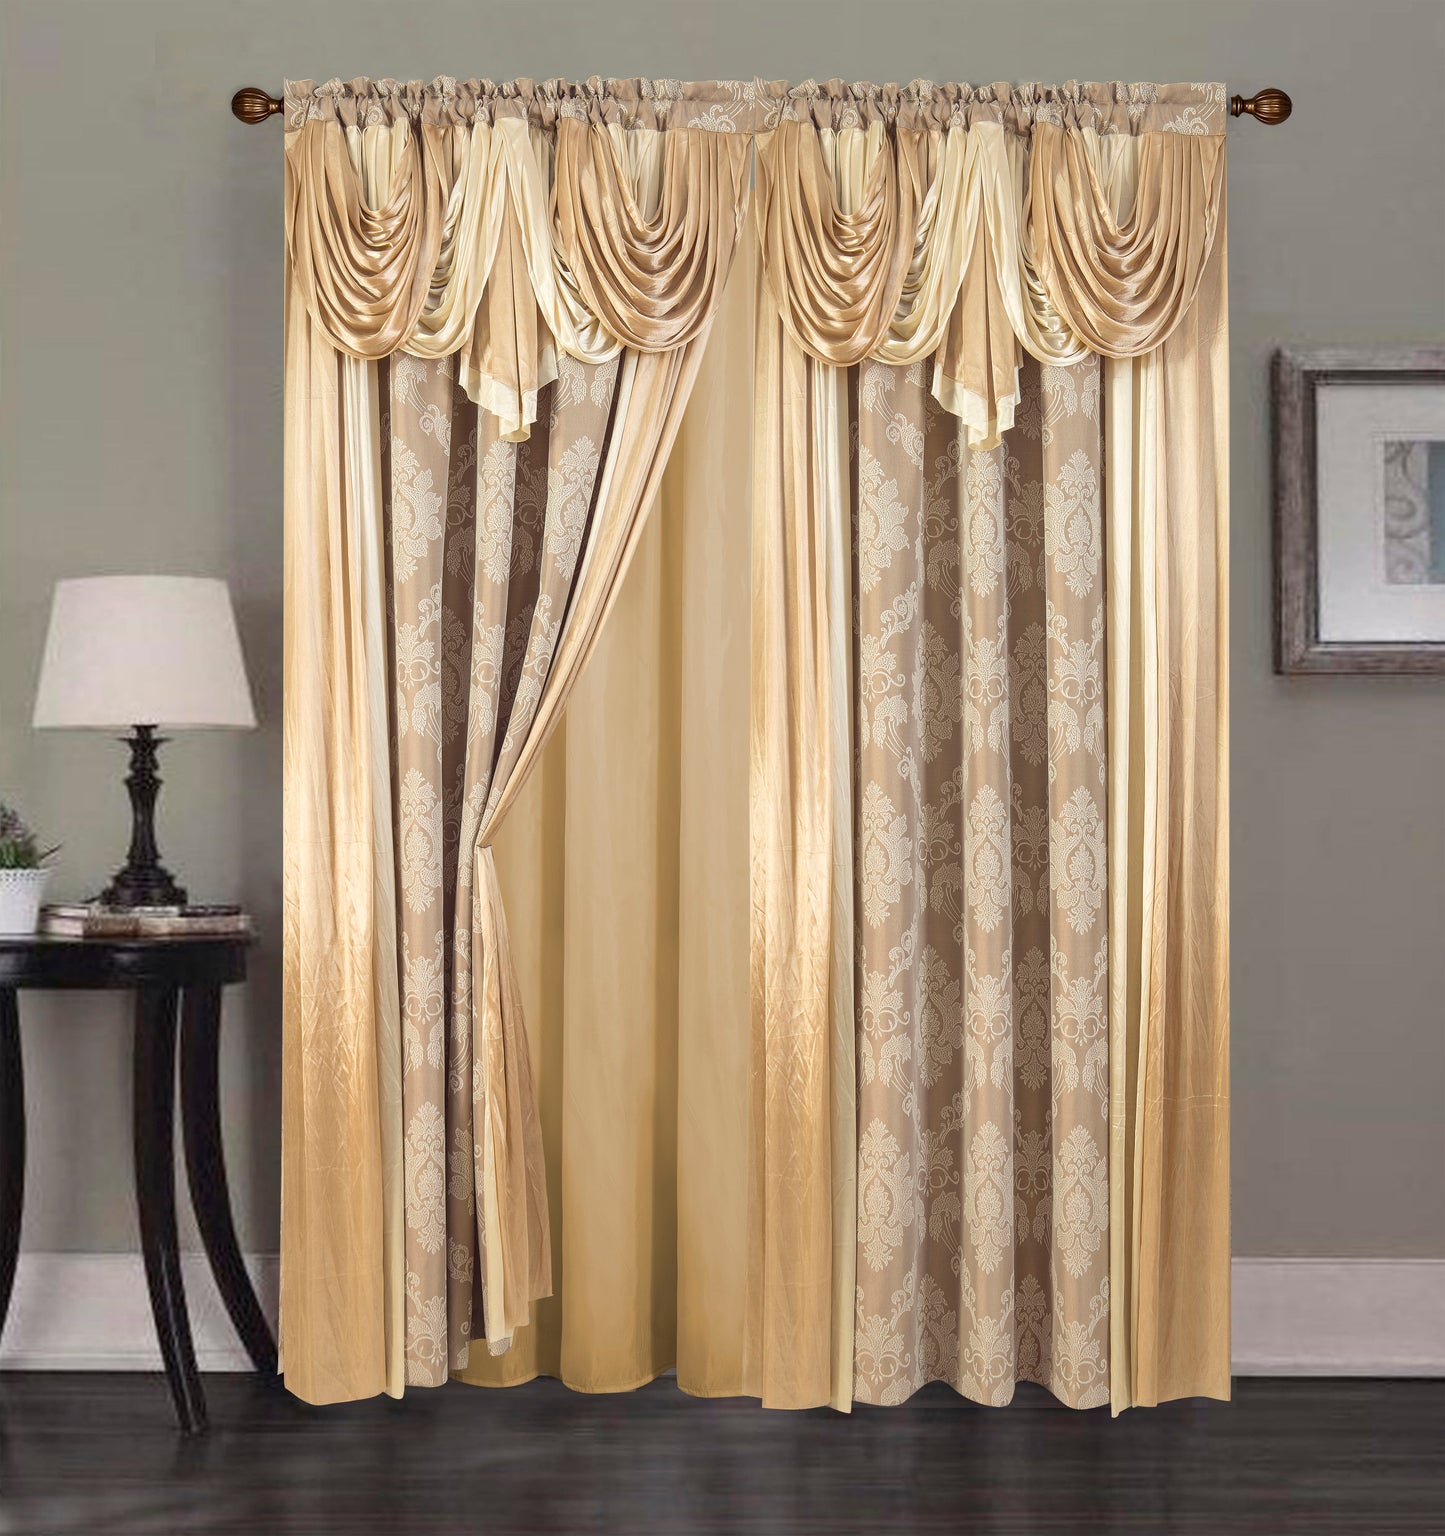 2PC CURTAIN SET W/ ATTACHED VALANCE & BACKING - Liliana